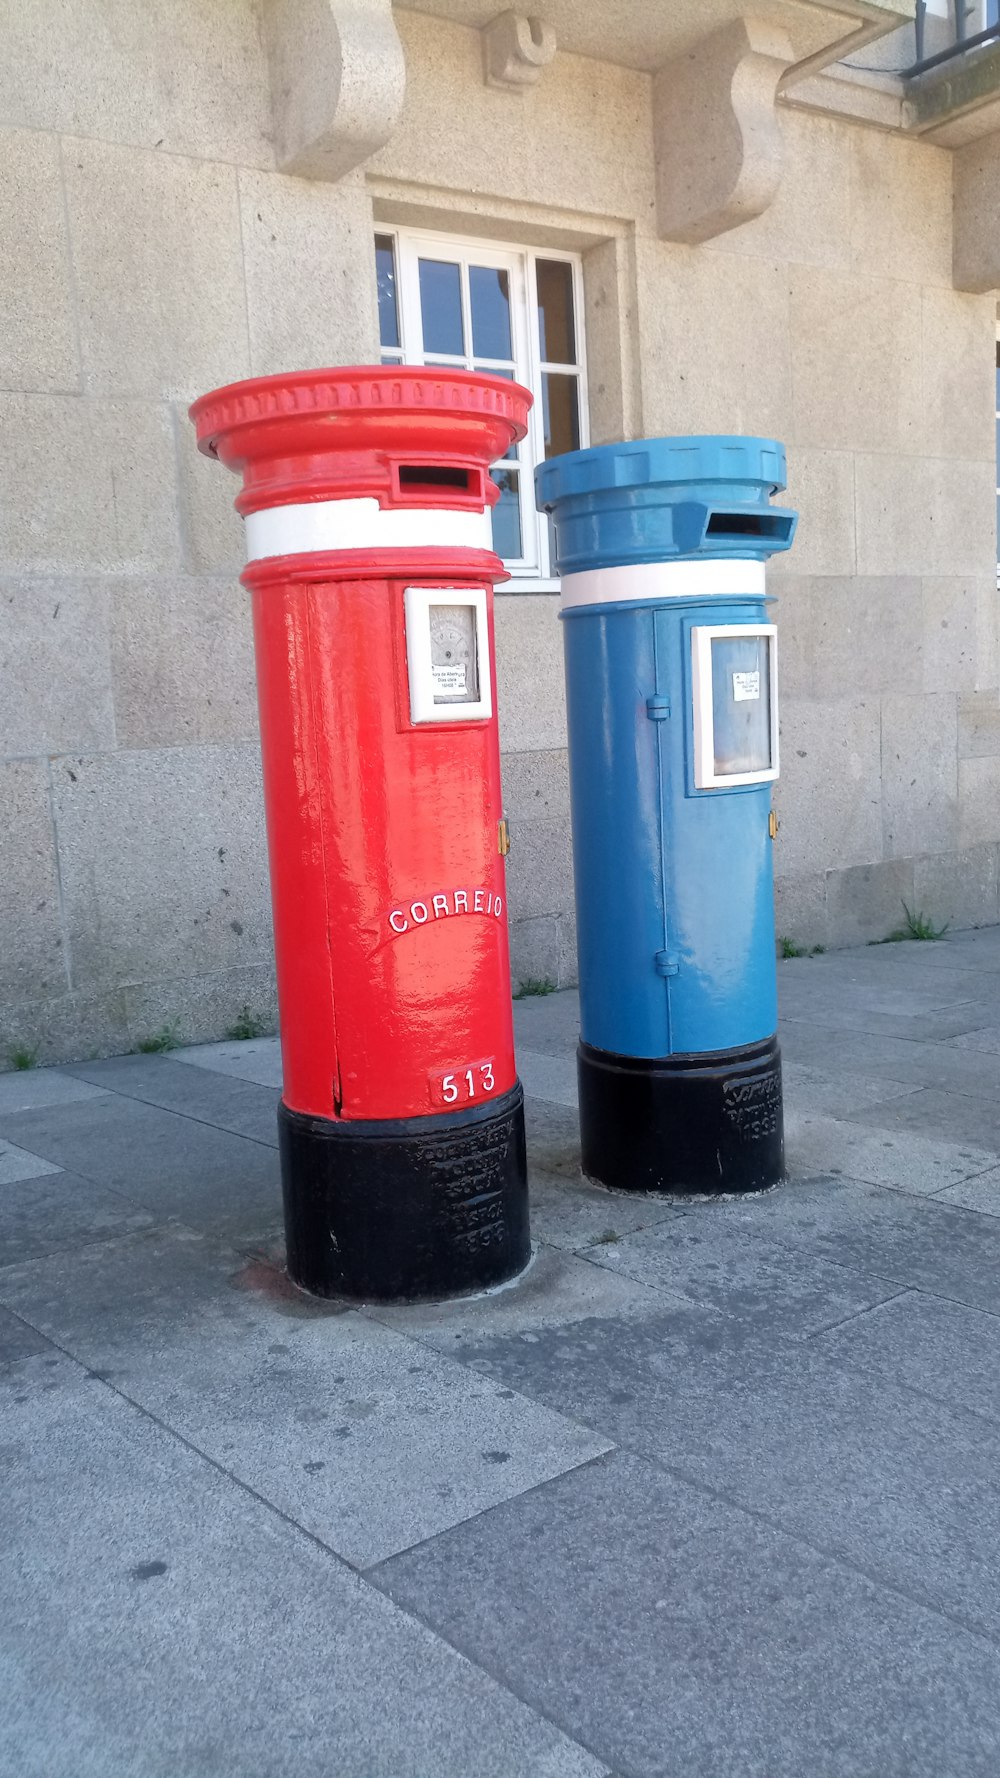 a couple of red and blue mail boxes sitting on the side of a road